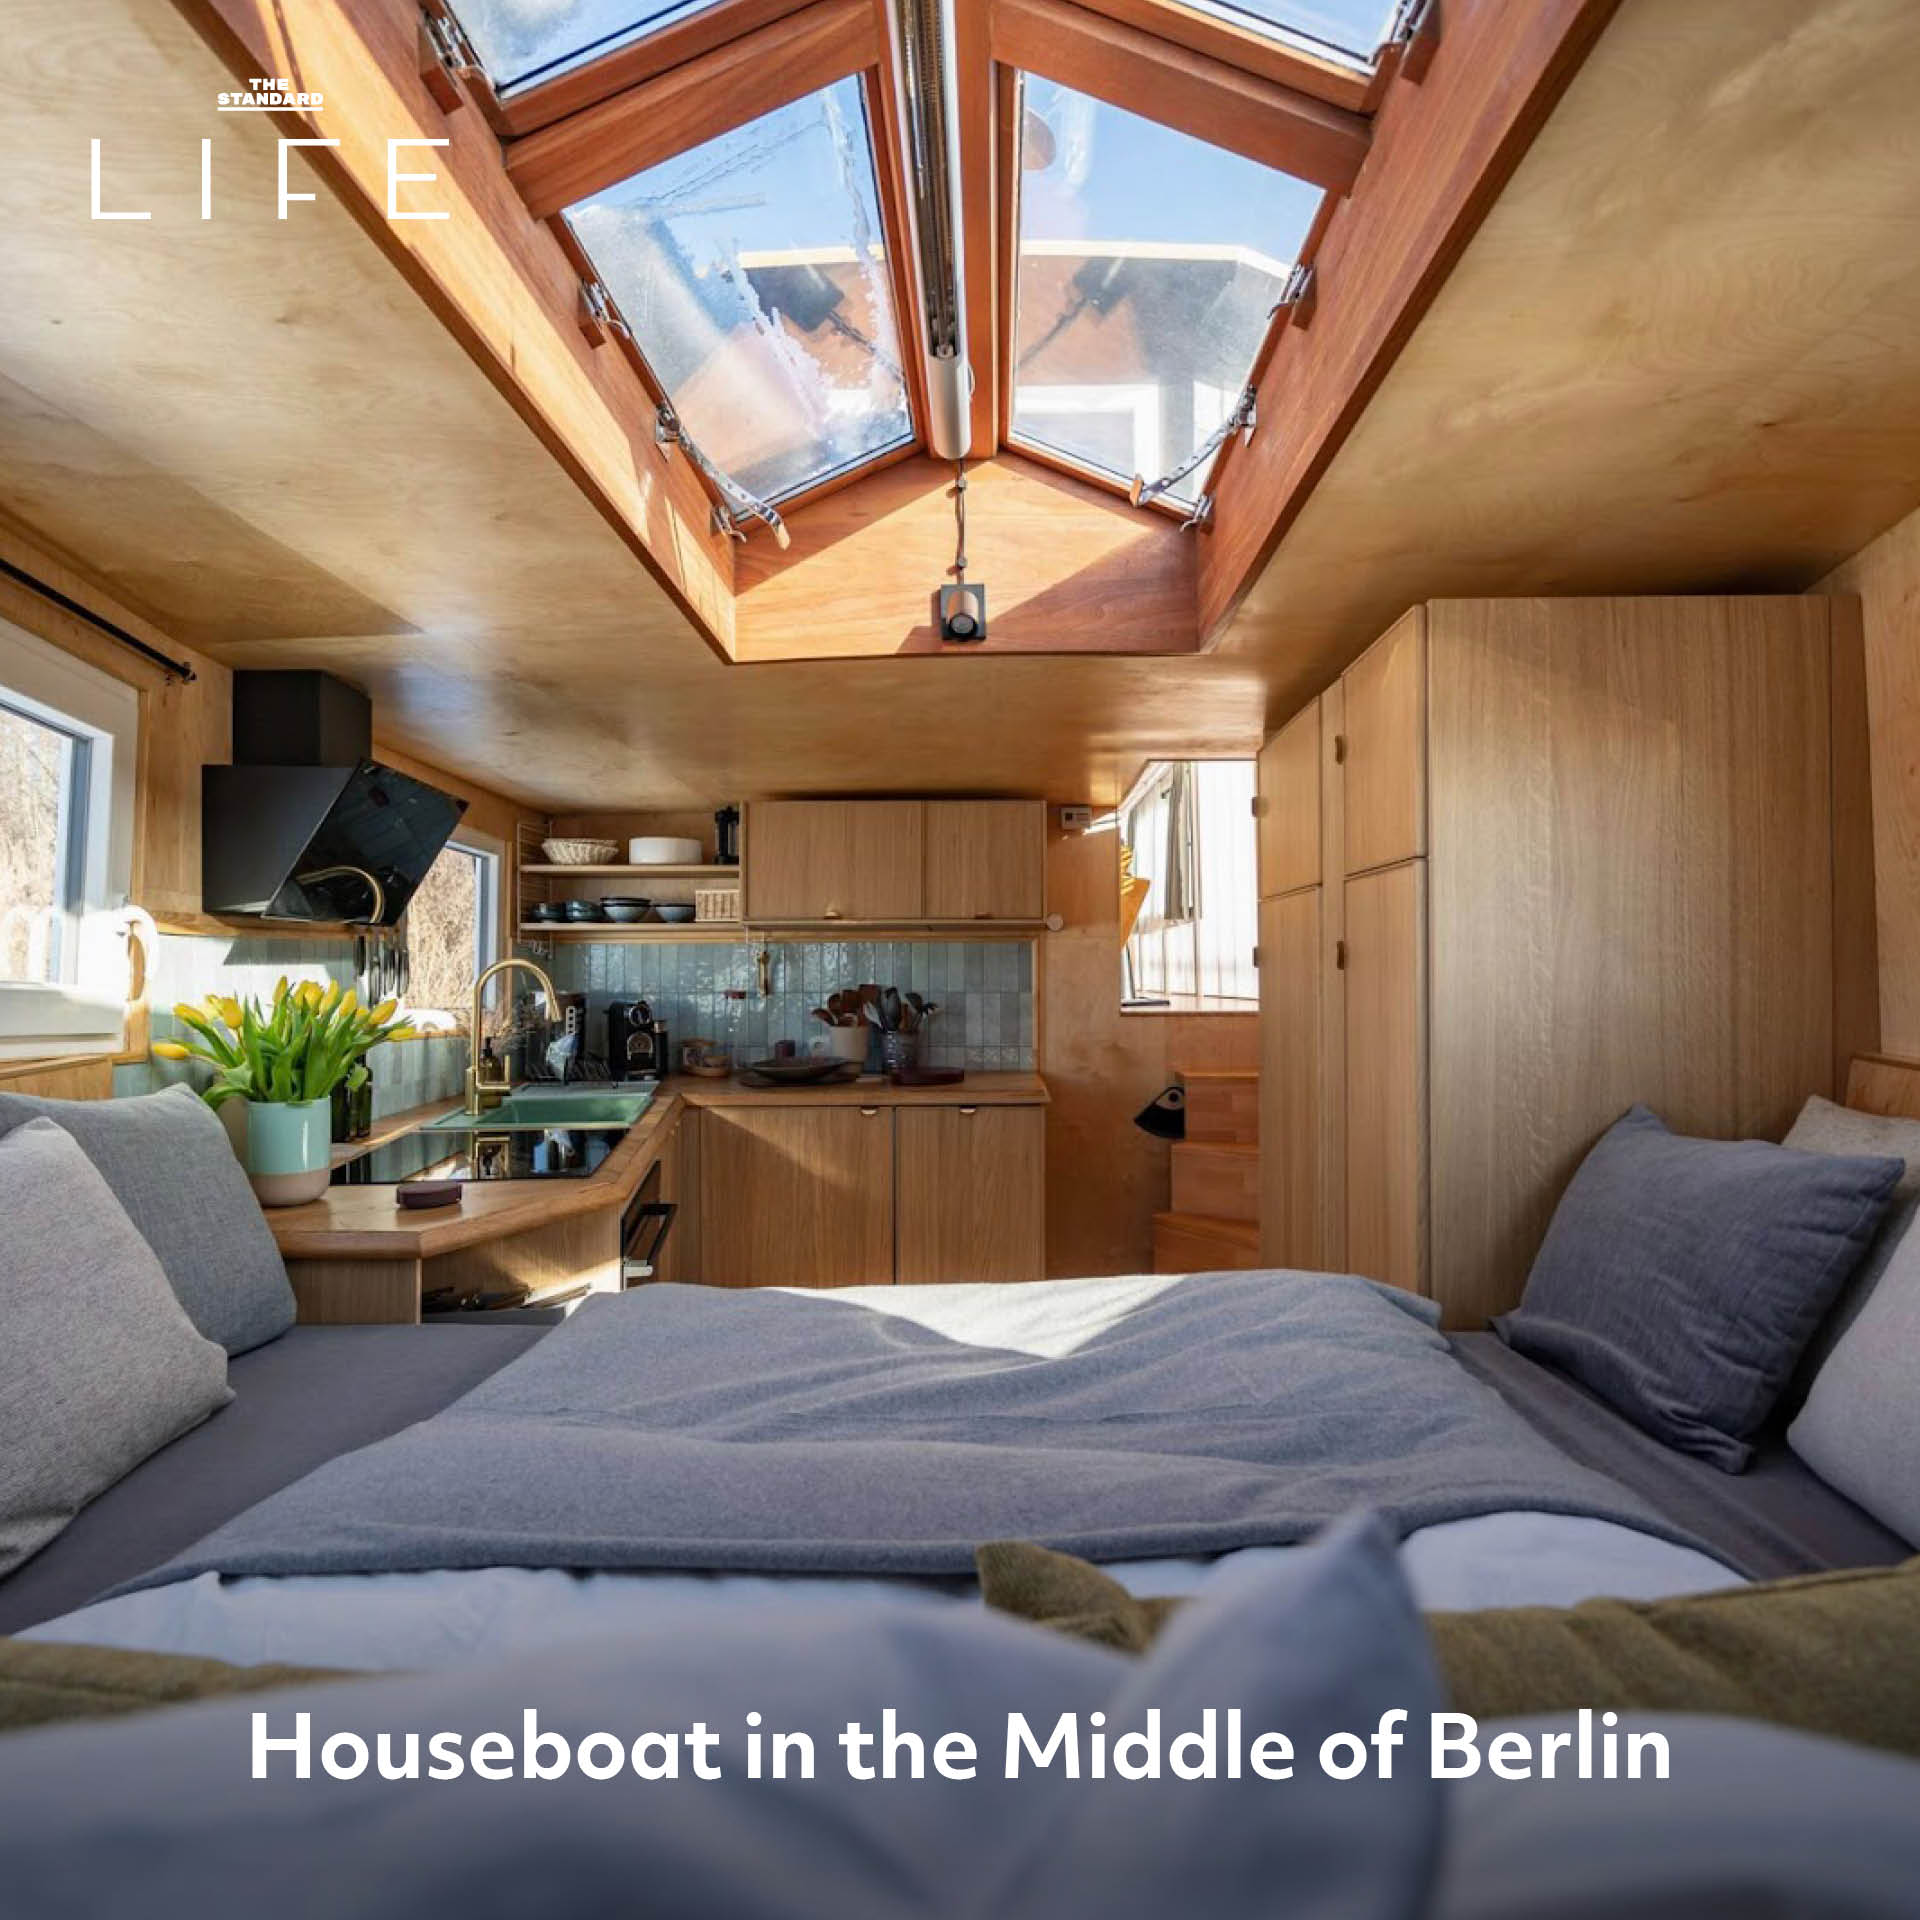 Houseboat in the Middle of Berlin